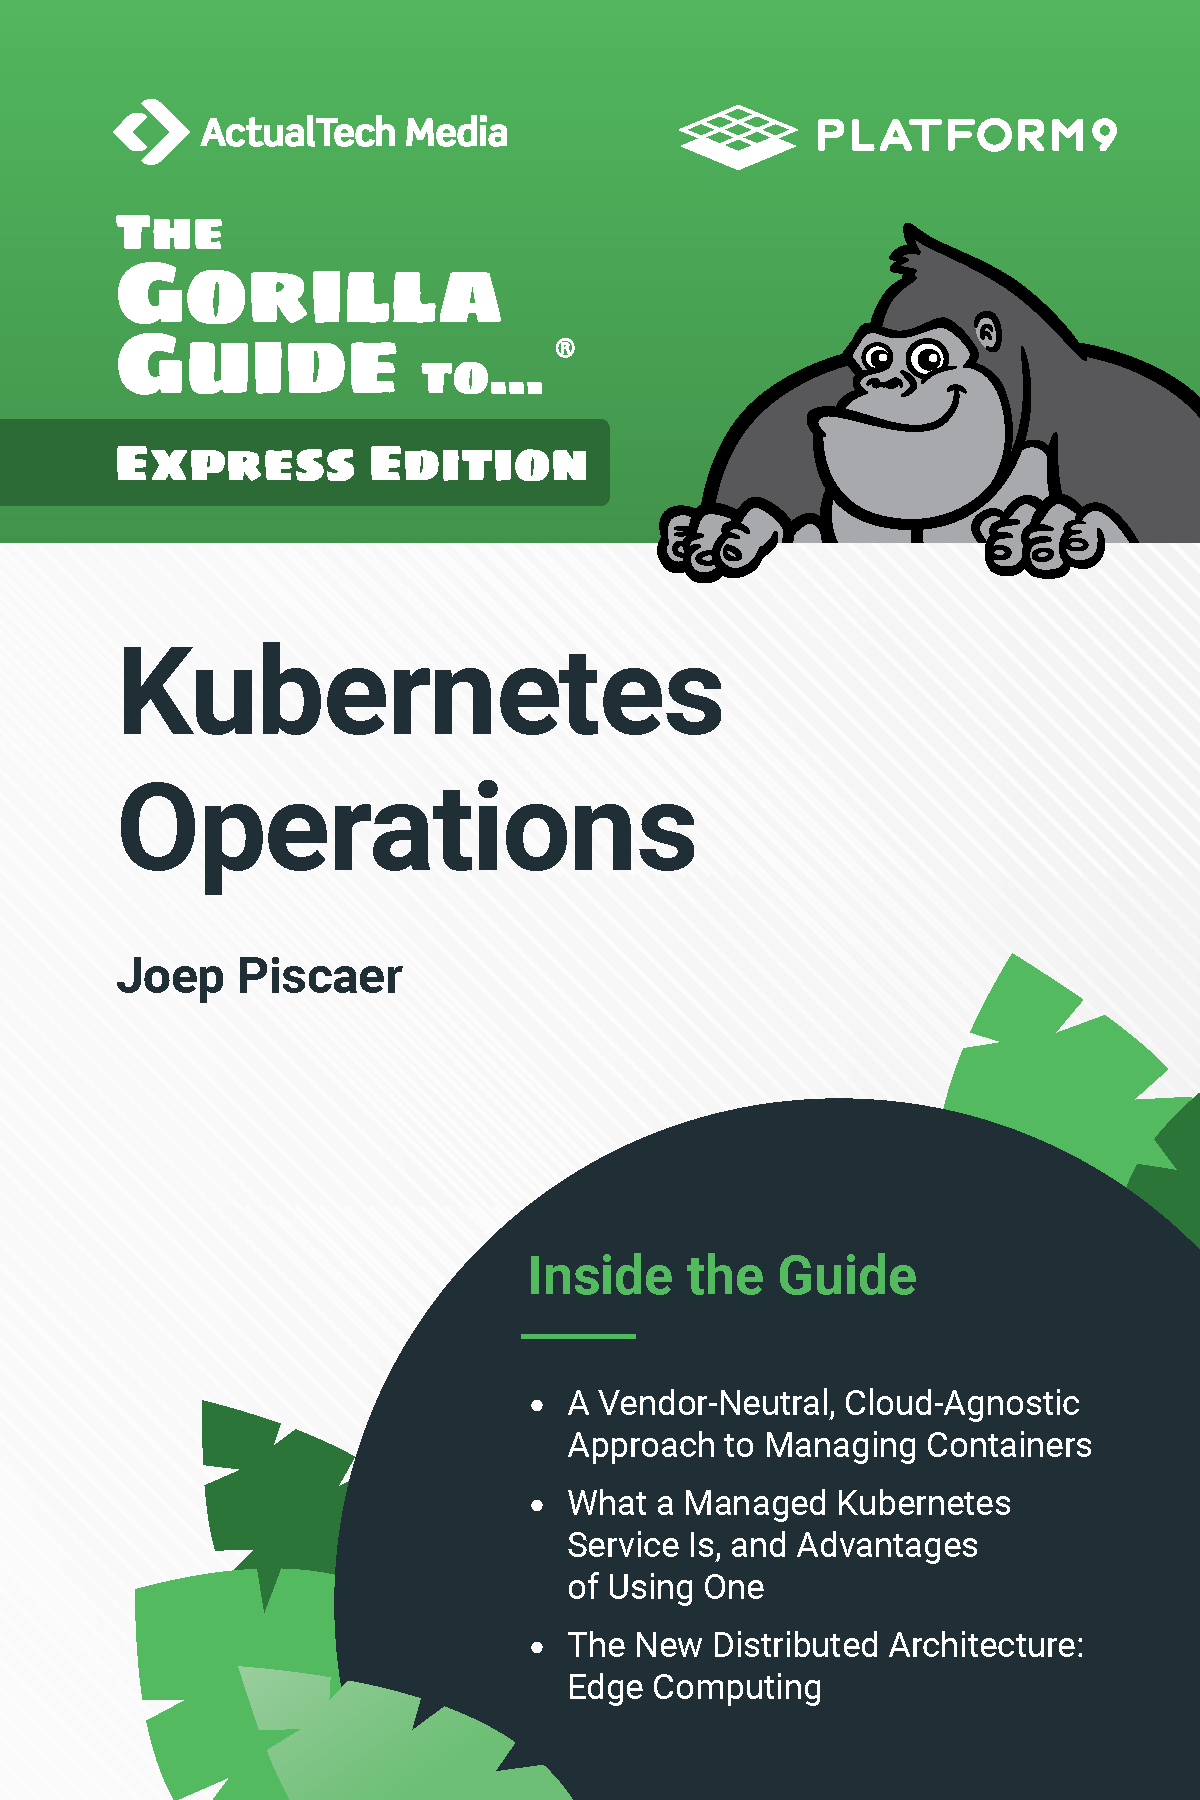 The Gorilla Guide to Kubernetes Operations